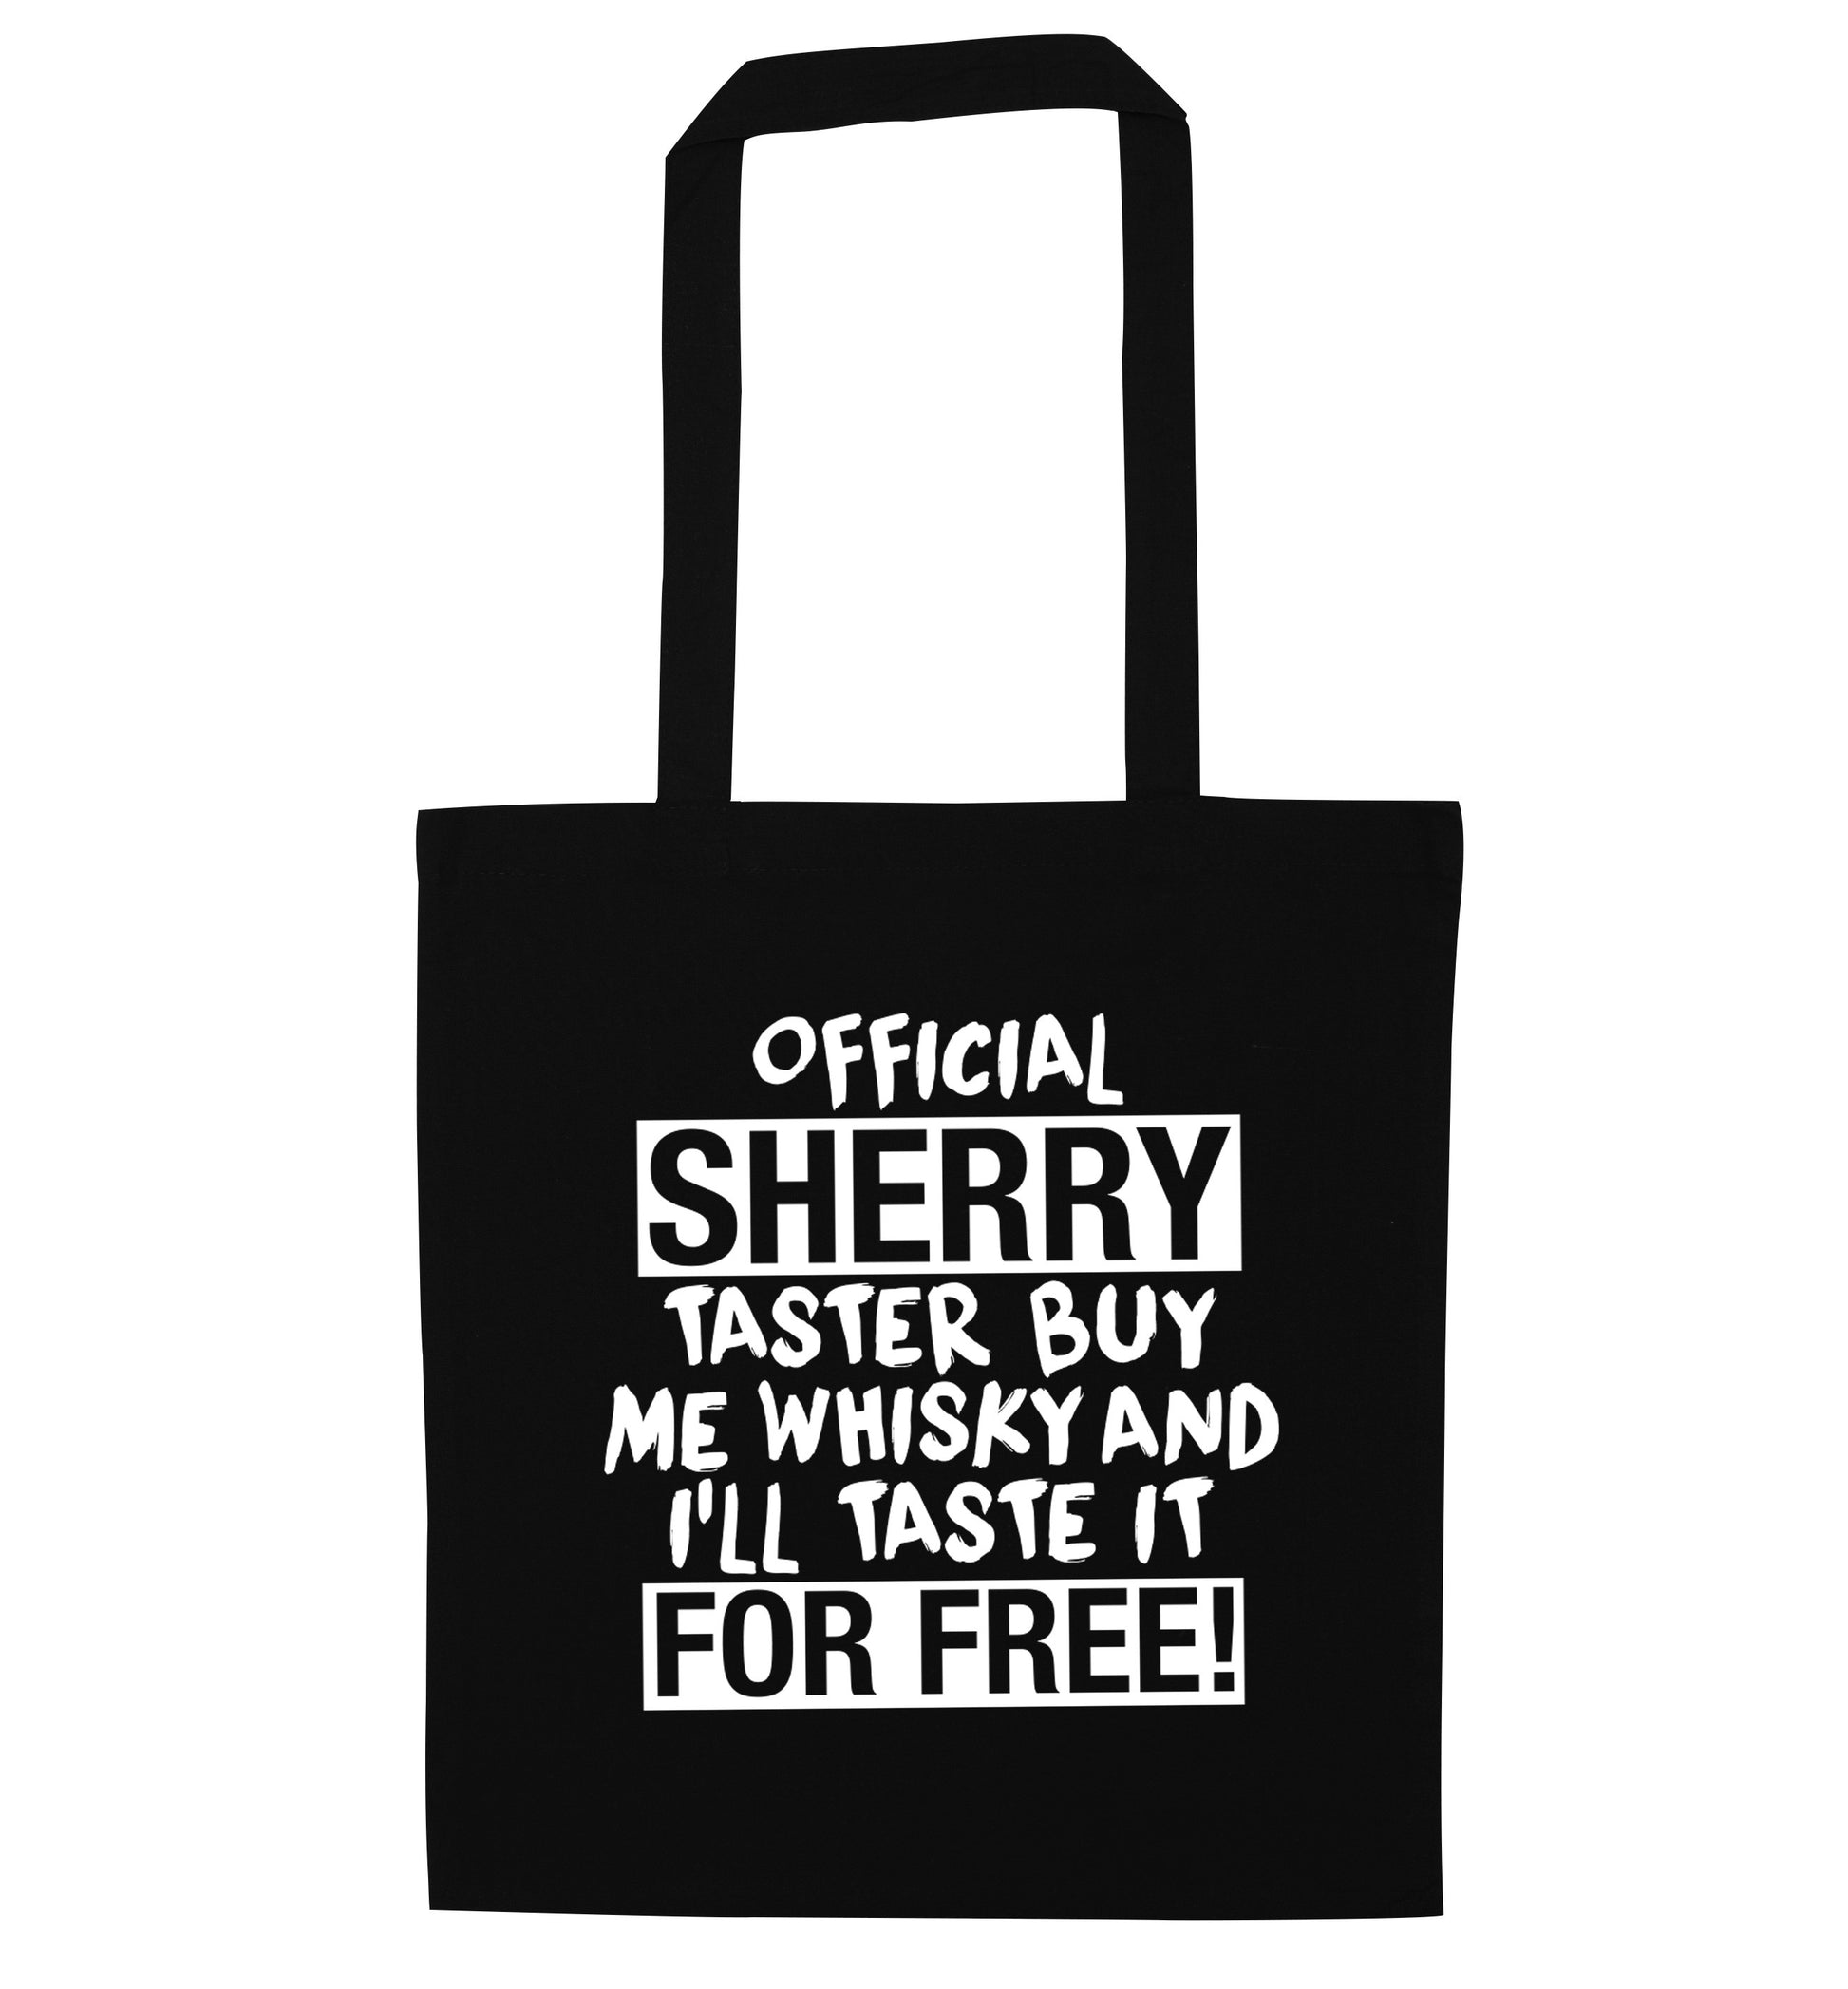 Official sherry taster buy me sherry and I'll taste it for free black tote bag